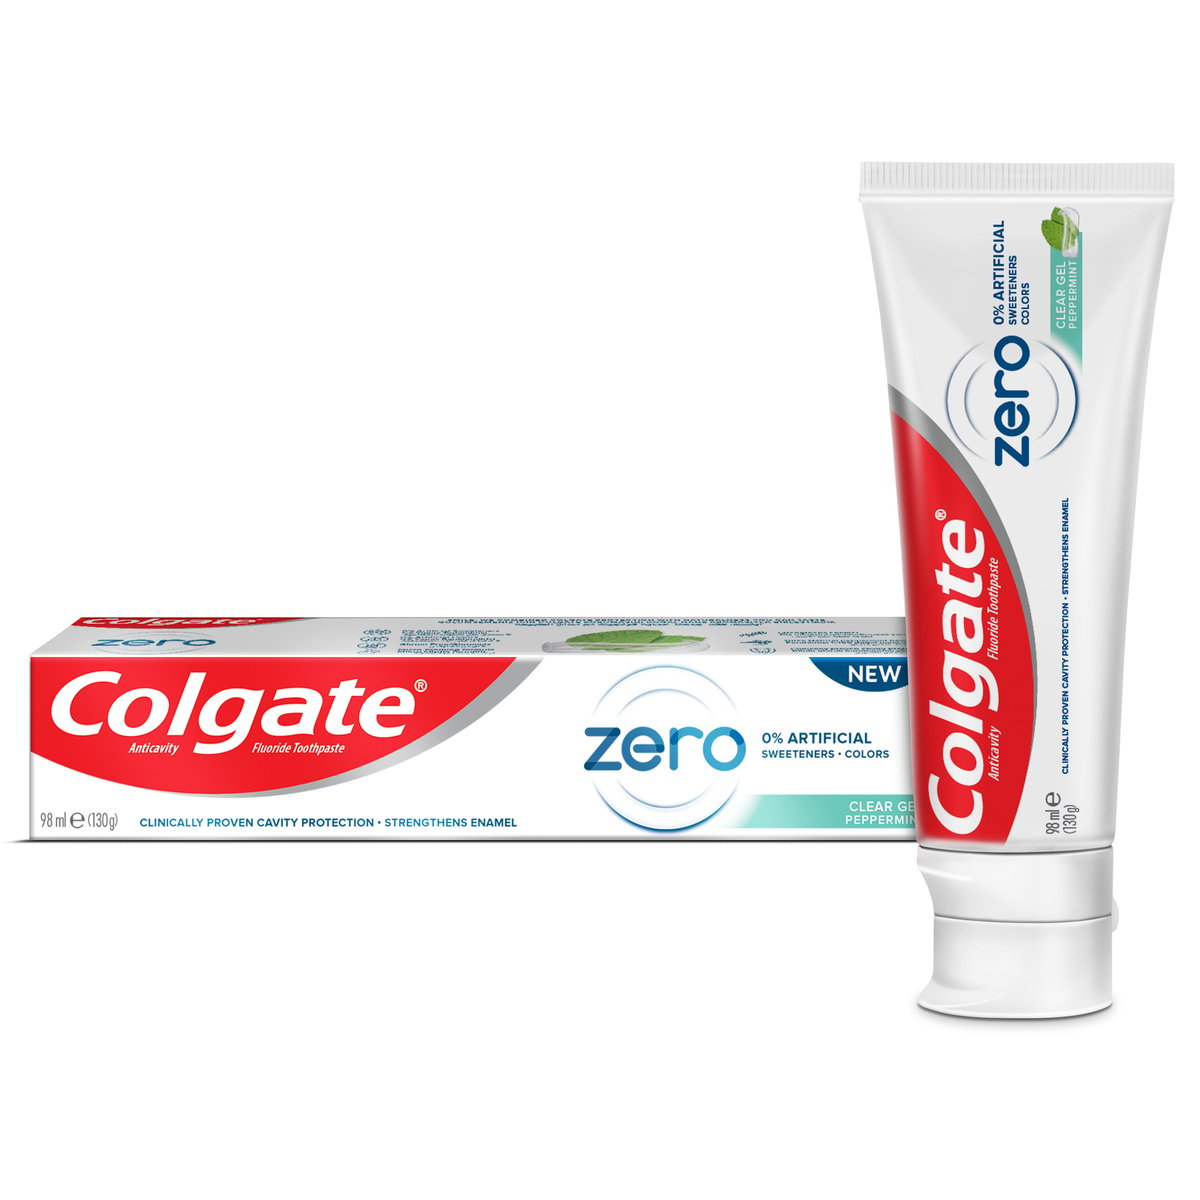 Colgate Zero % Artificial Colours and Sweeteners Peppermint Clear Gel Toothpaste 98 ml